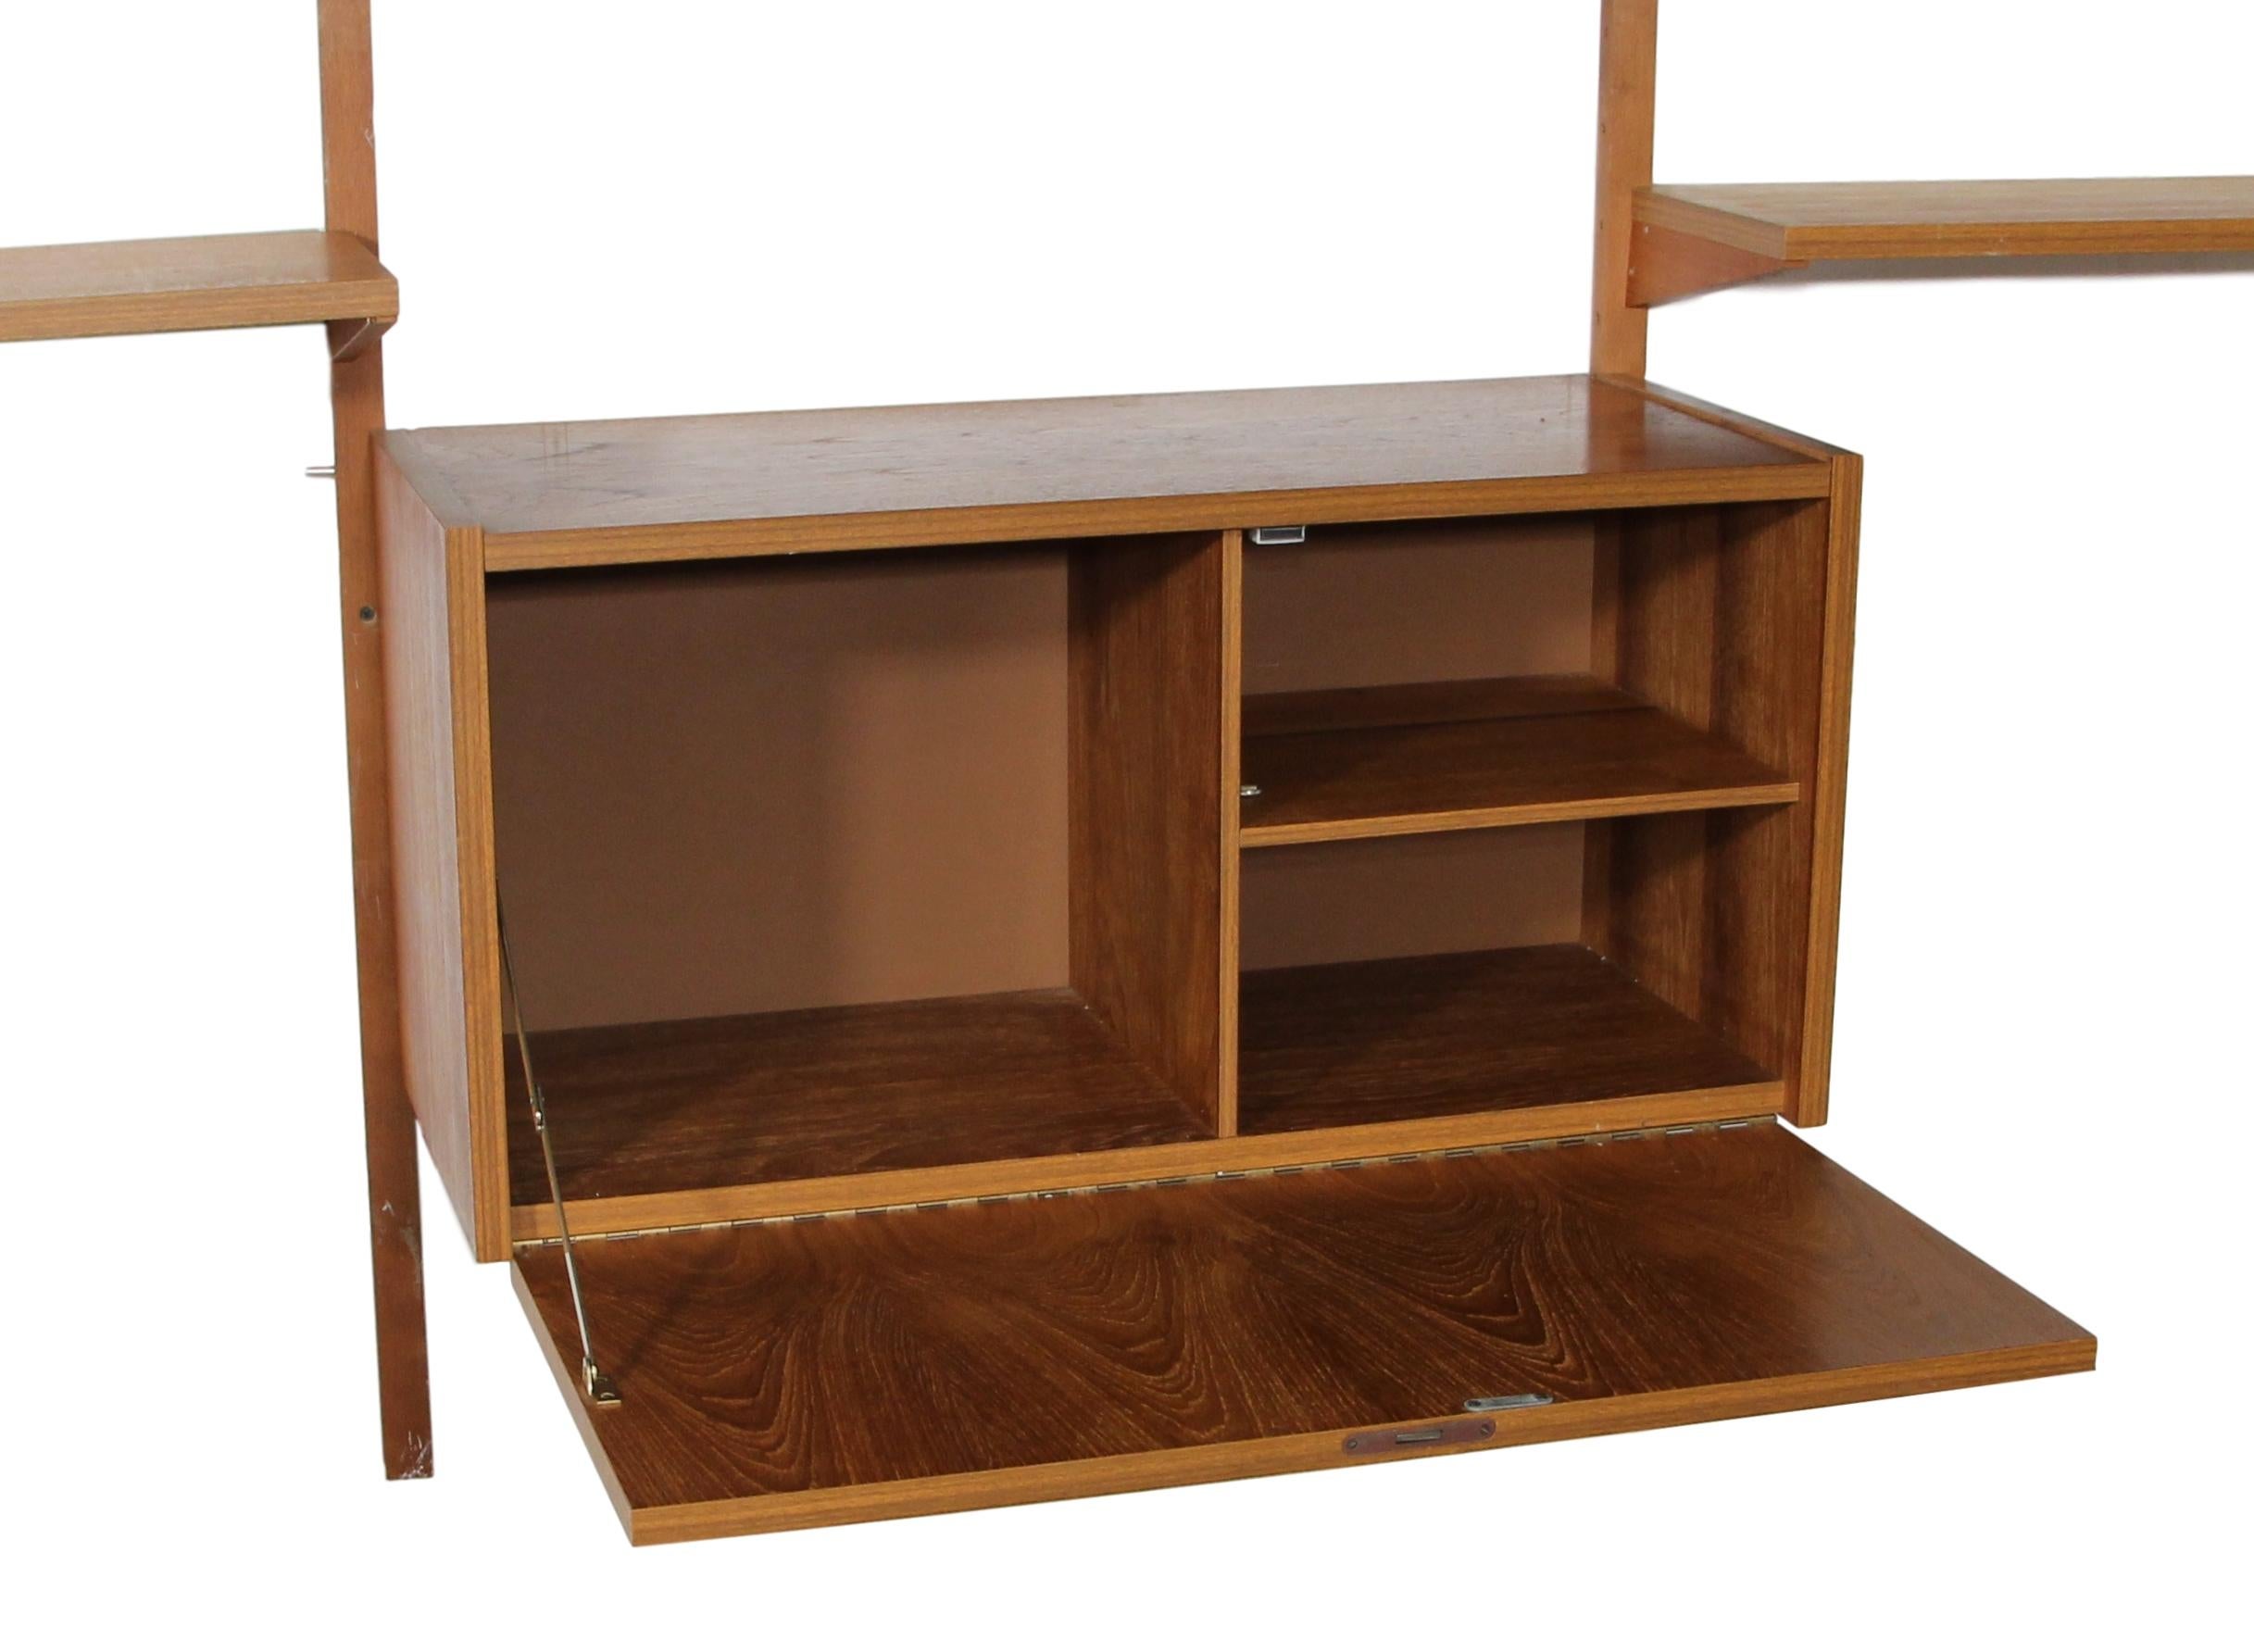 Midcentury Danish 7 Bay Teak Shelving Unit By PS Systems 3